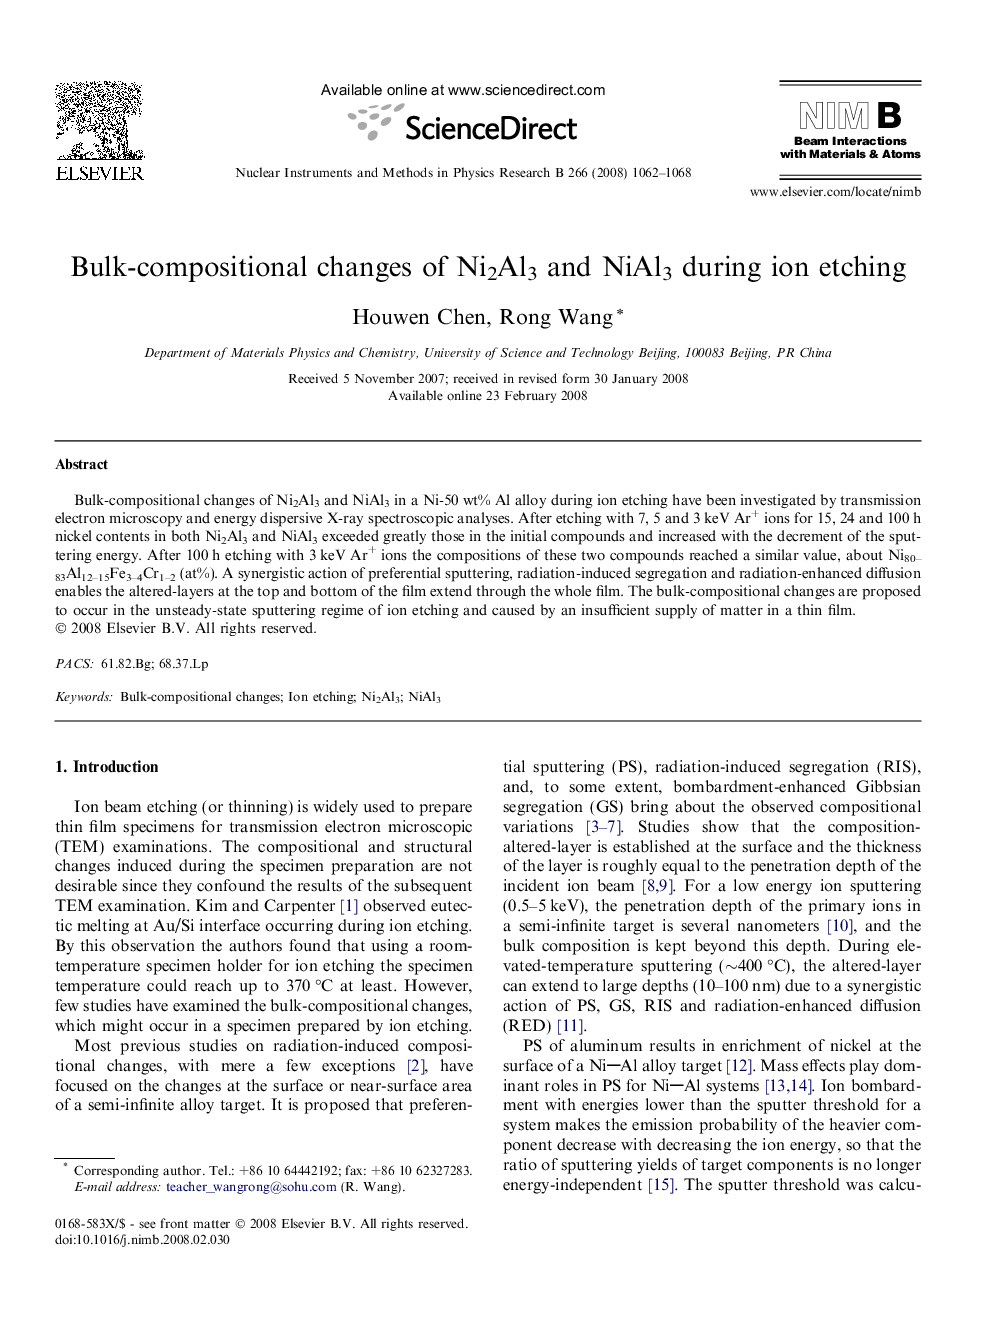 Bulk-compositional changes of Ni2Al3 and NiAl3 during ion etching